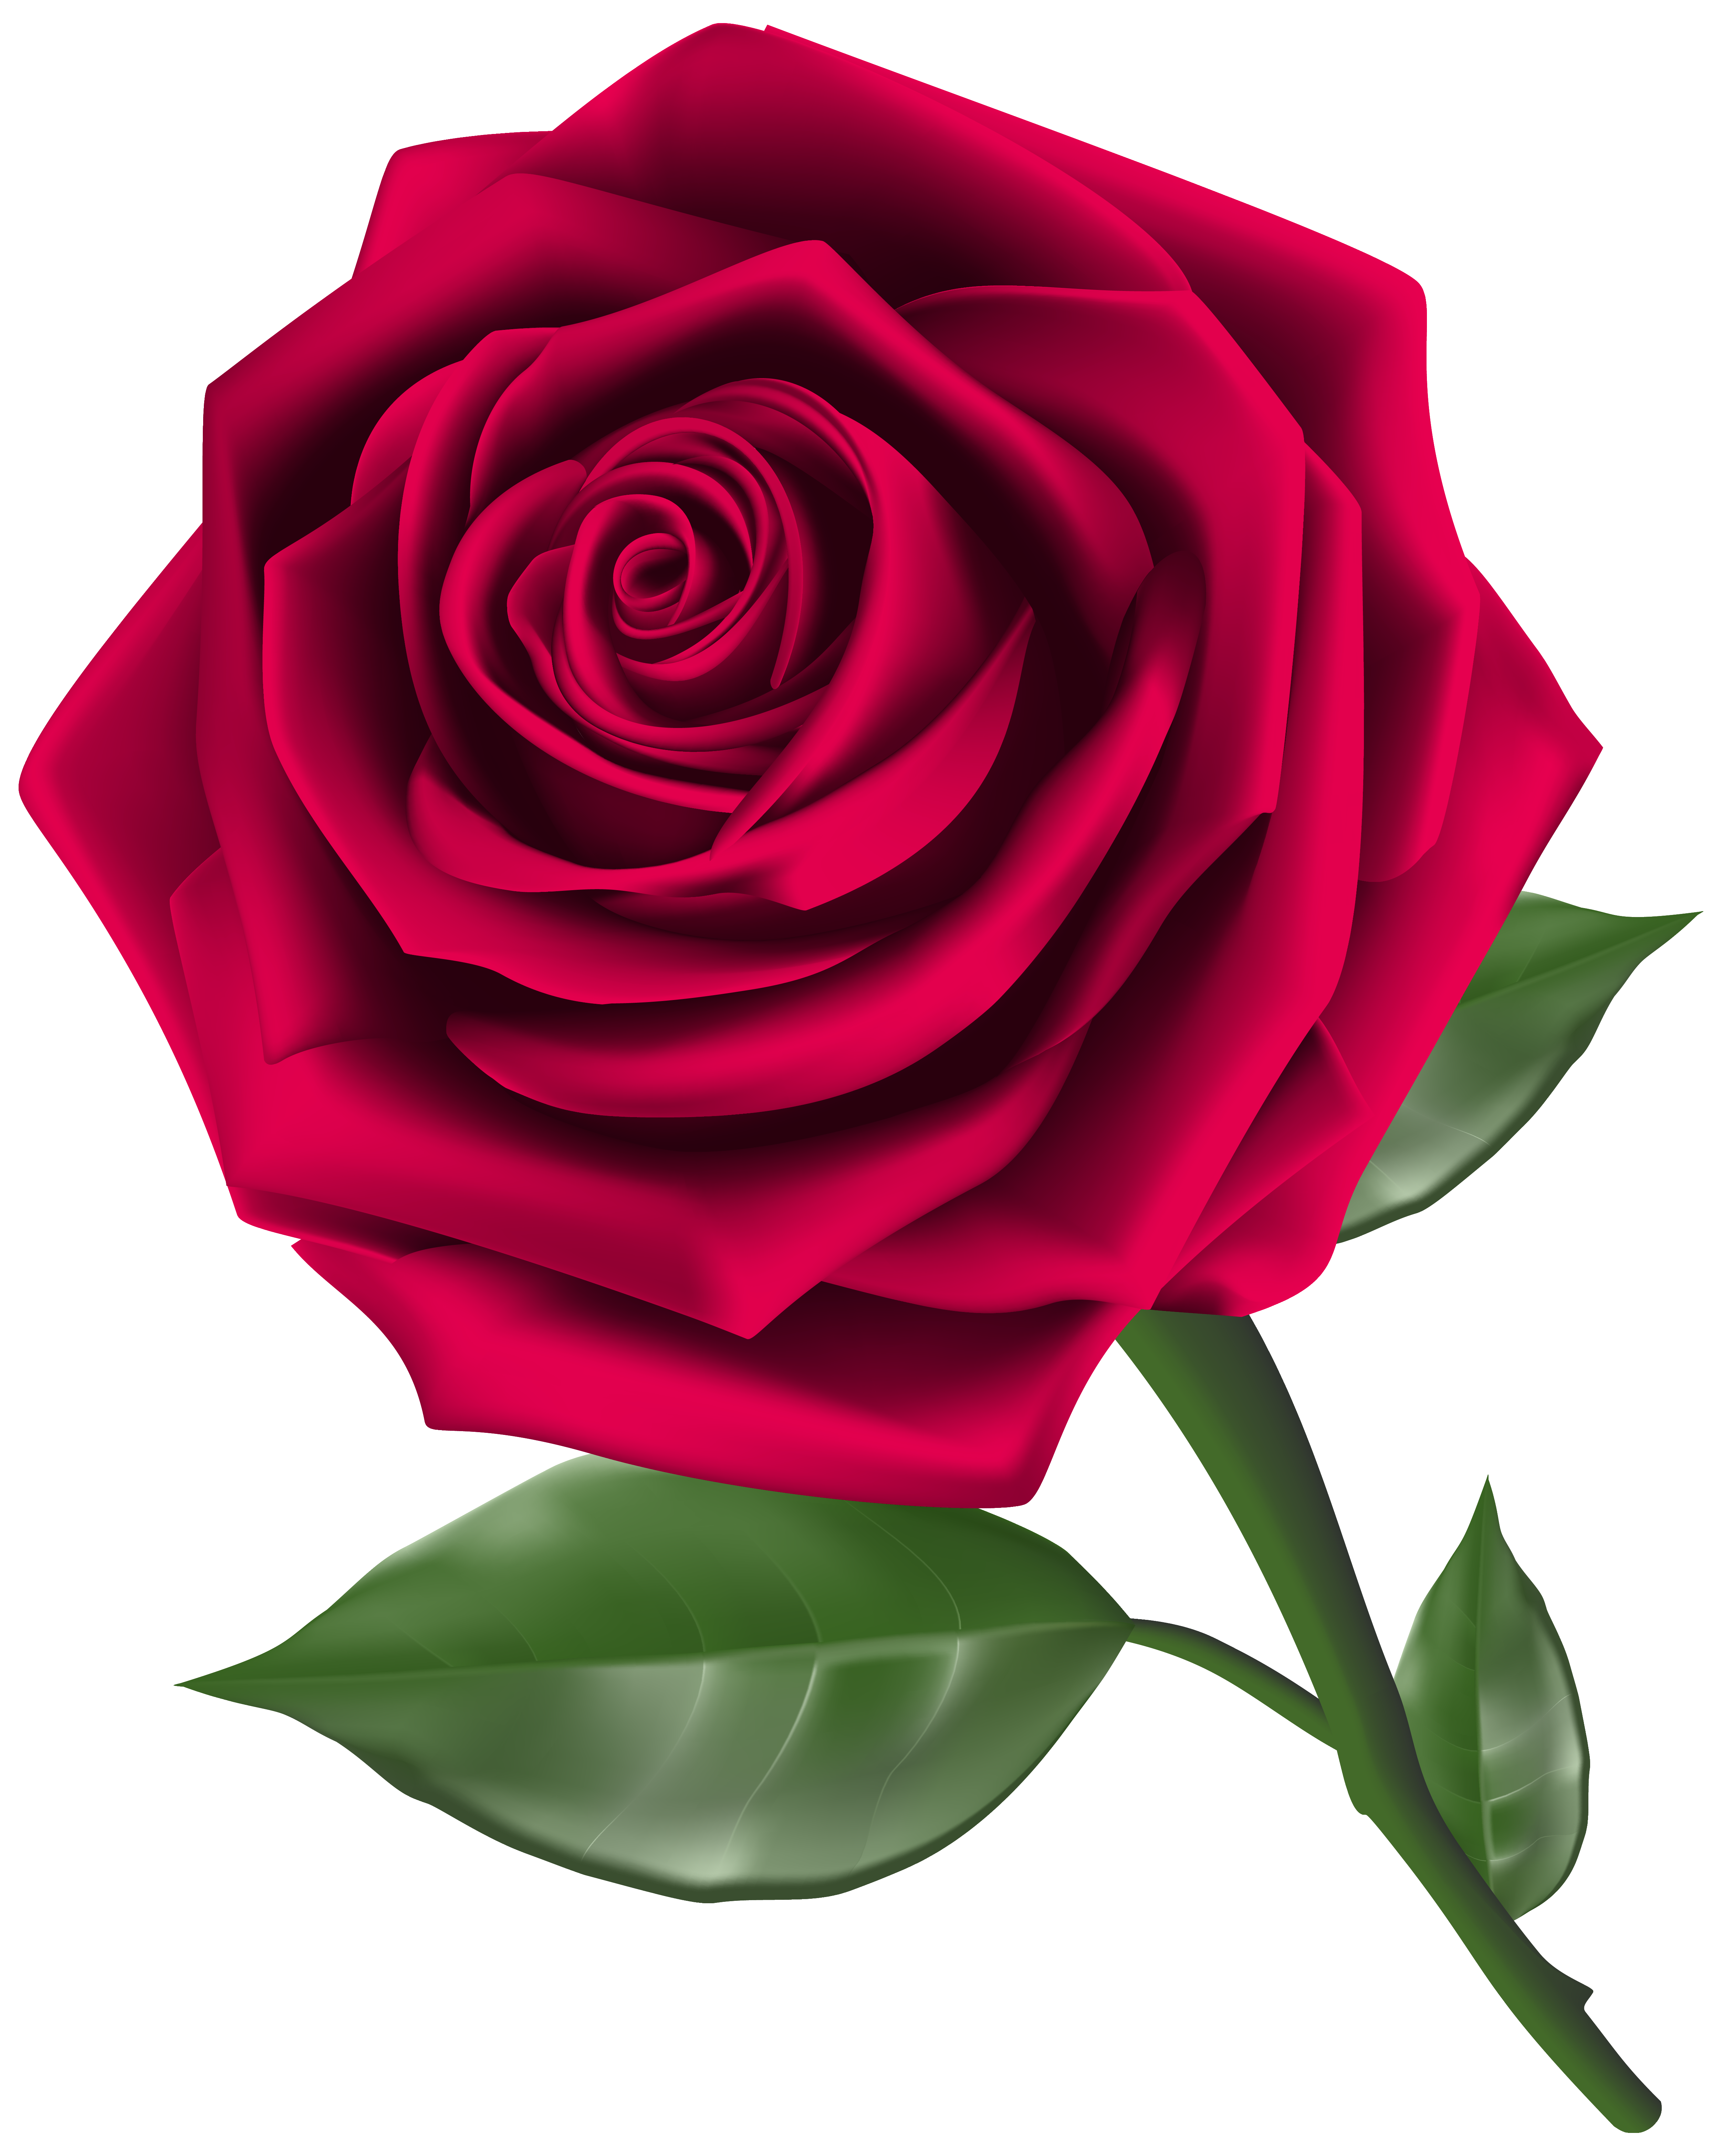 Free 3D Roses Cliparts, Download Free Clip Art, Free Clip Art on